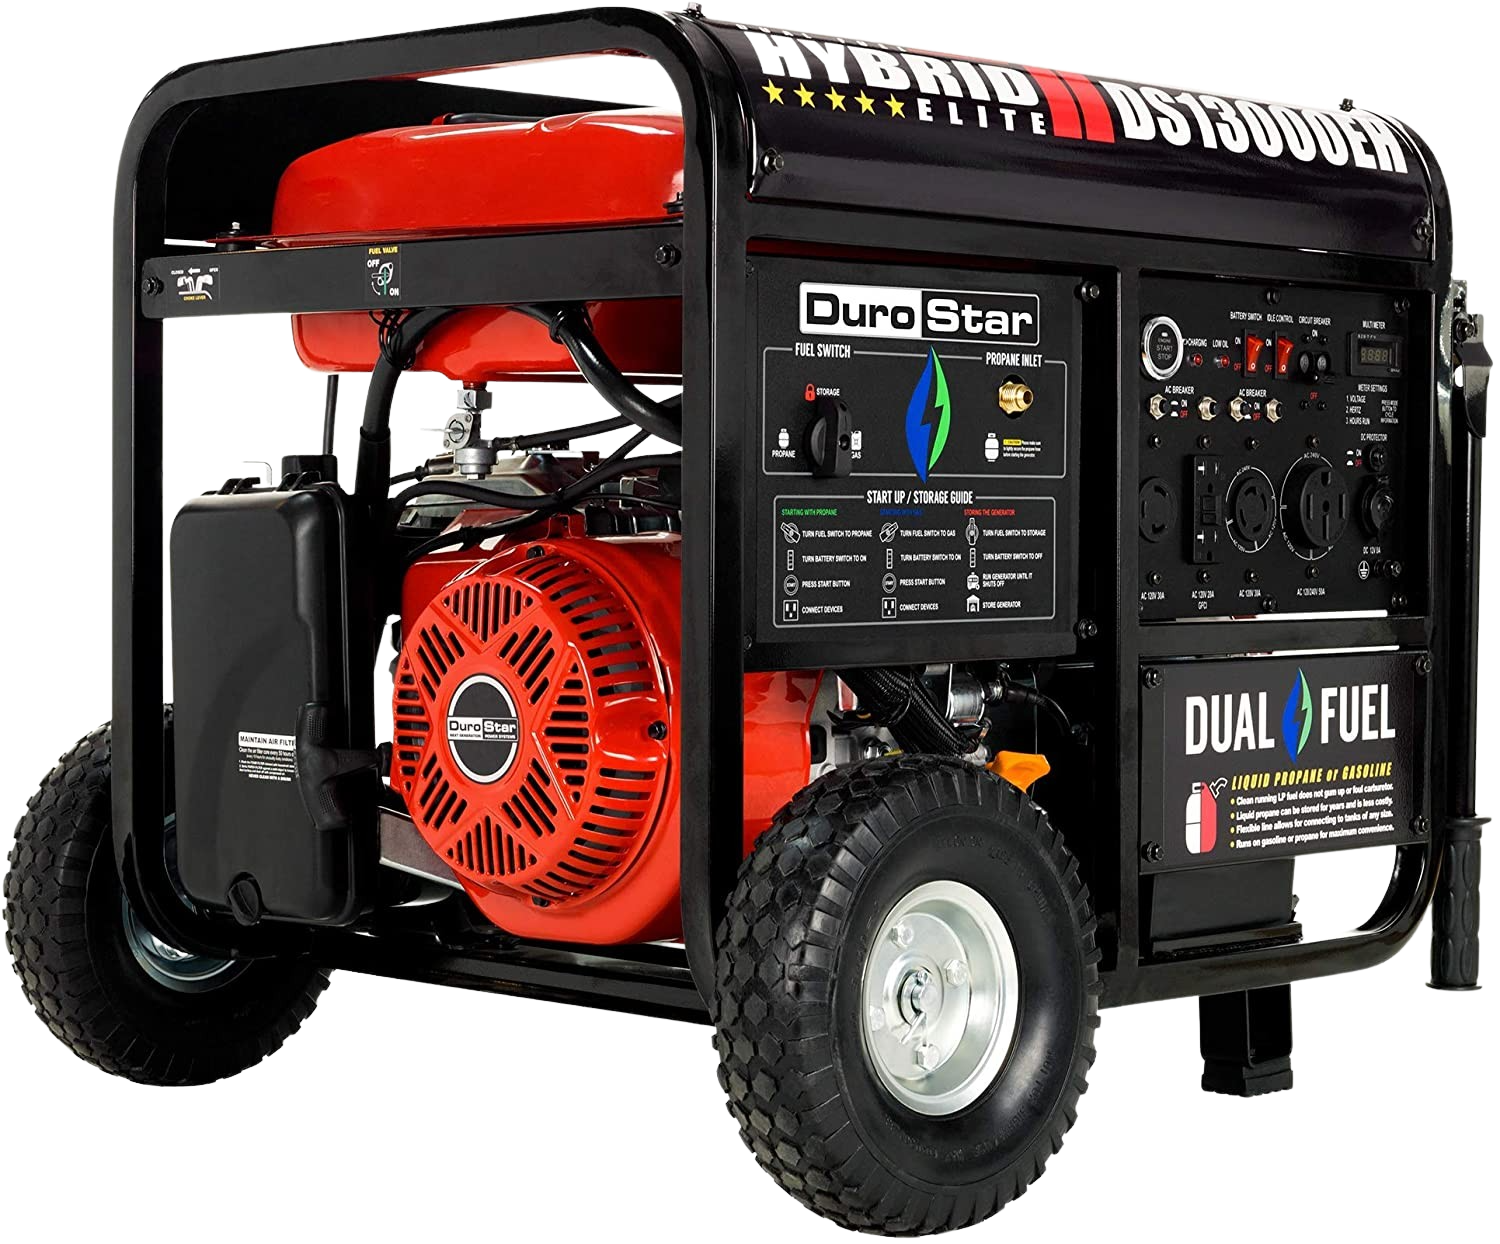 Duromax, DuroMax / DuroStar DS13000EH 10500W/13000W Electric Start Dual Fuel Generator New (Red Version of XP13000EH)